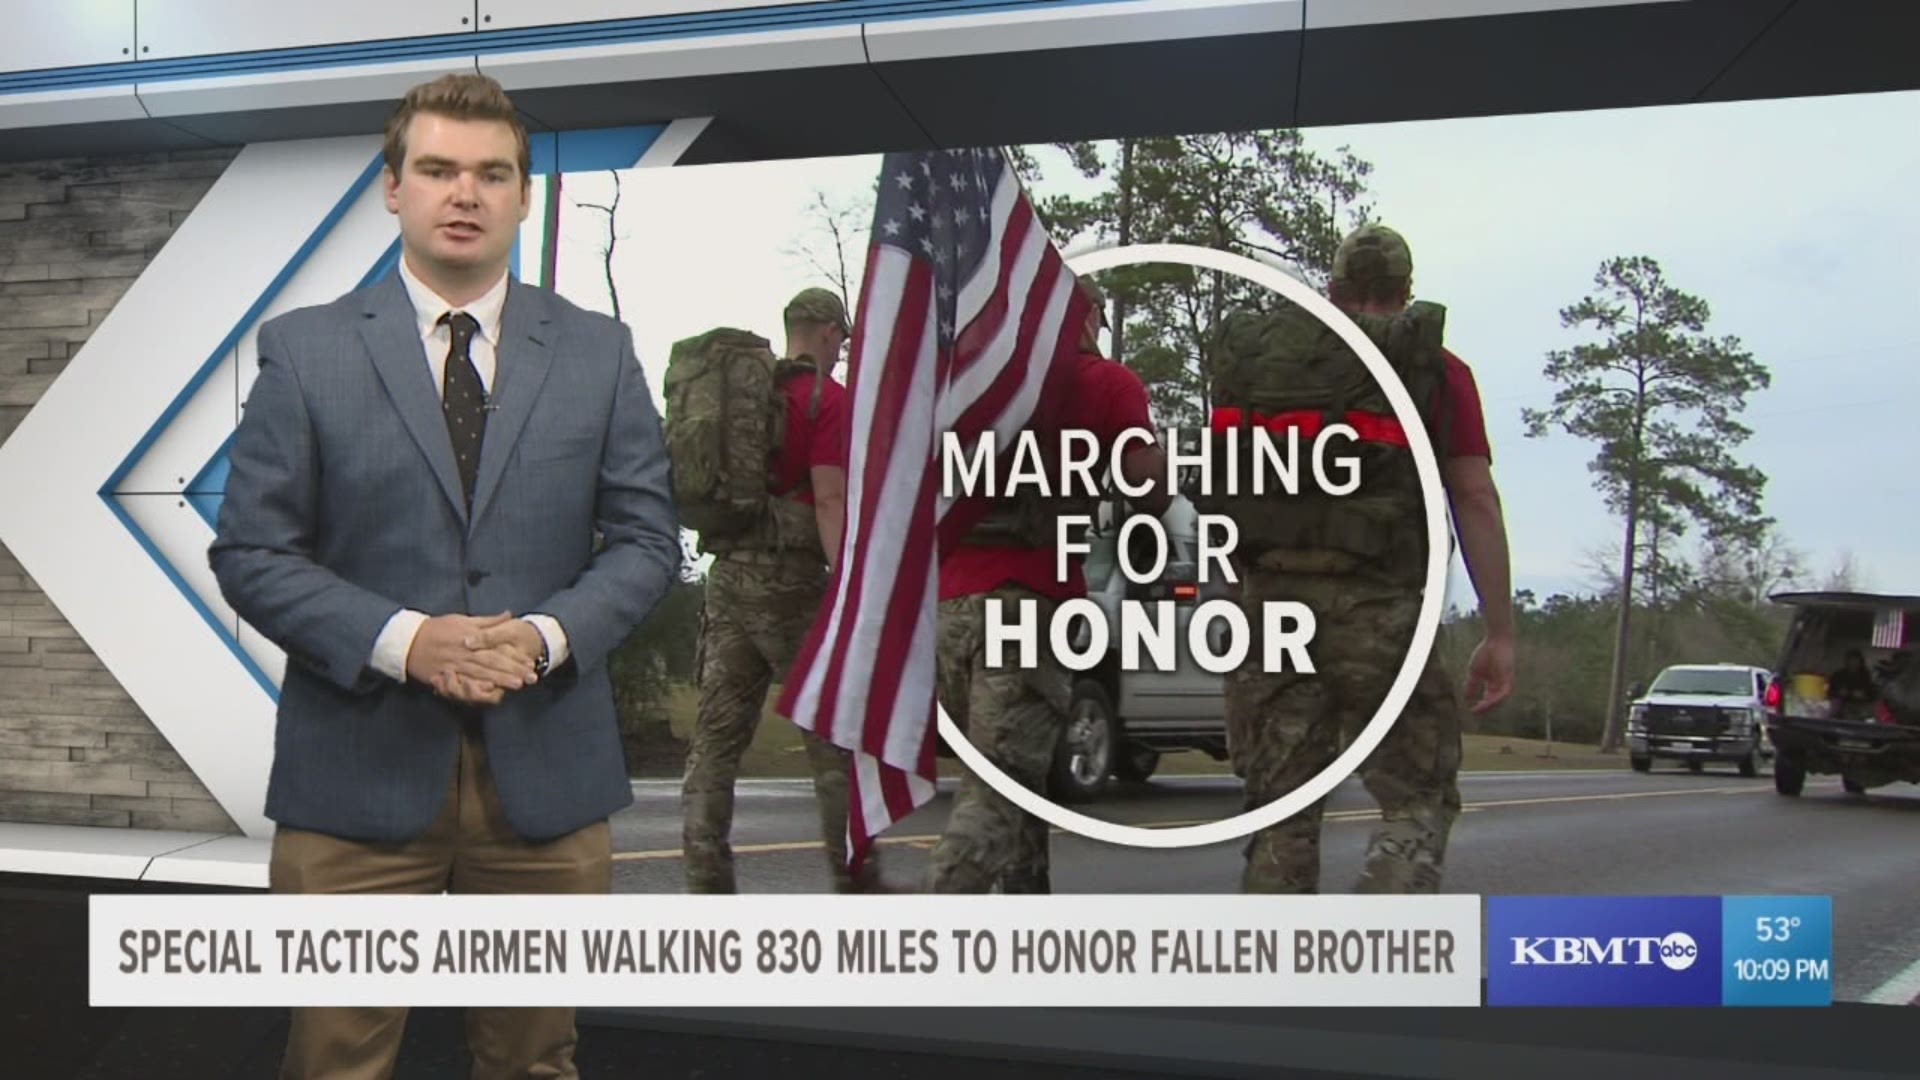 Twenty members from the Air Force Special Tactics have volunteered to participate in a memorial march from Texas to Florida, carrying the memory of Air Force Staff Sergeant Dylan Elchin, 25, with them.